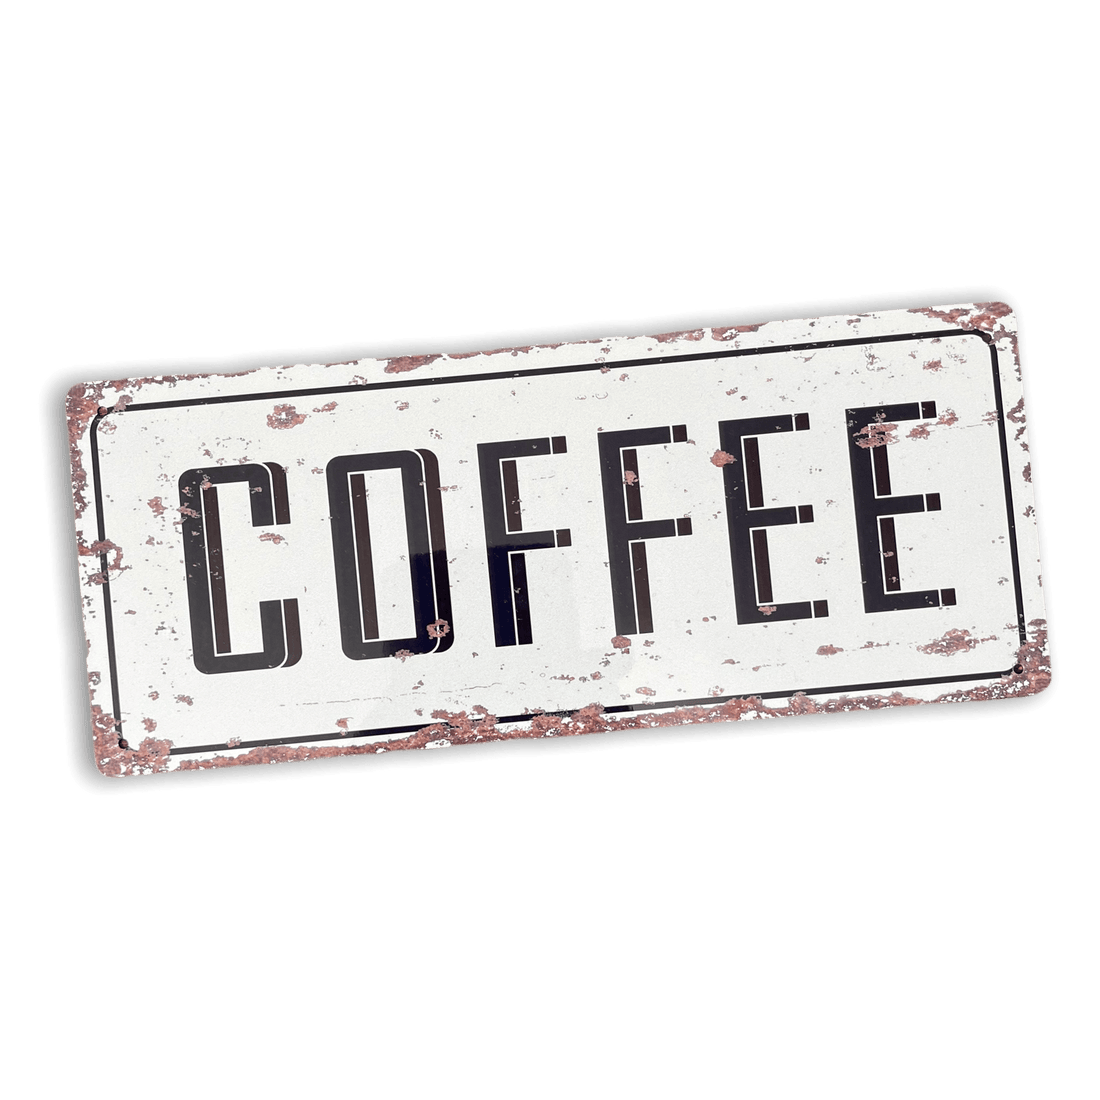 Vintage Metal Sign - Retro Coffee Wall Sign - £20.99 - Signs & Rules 